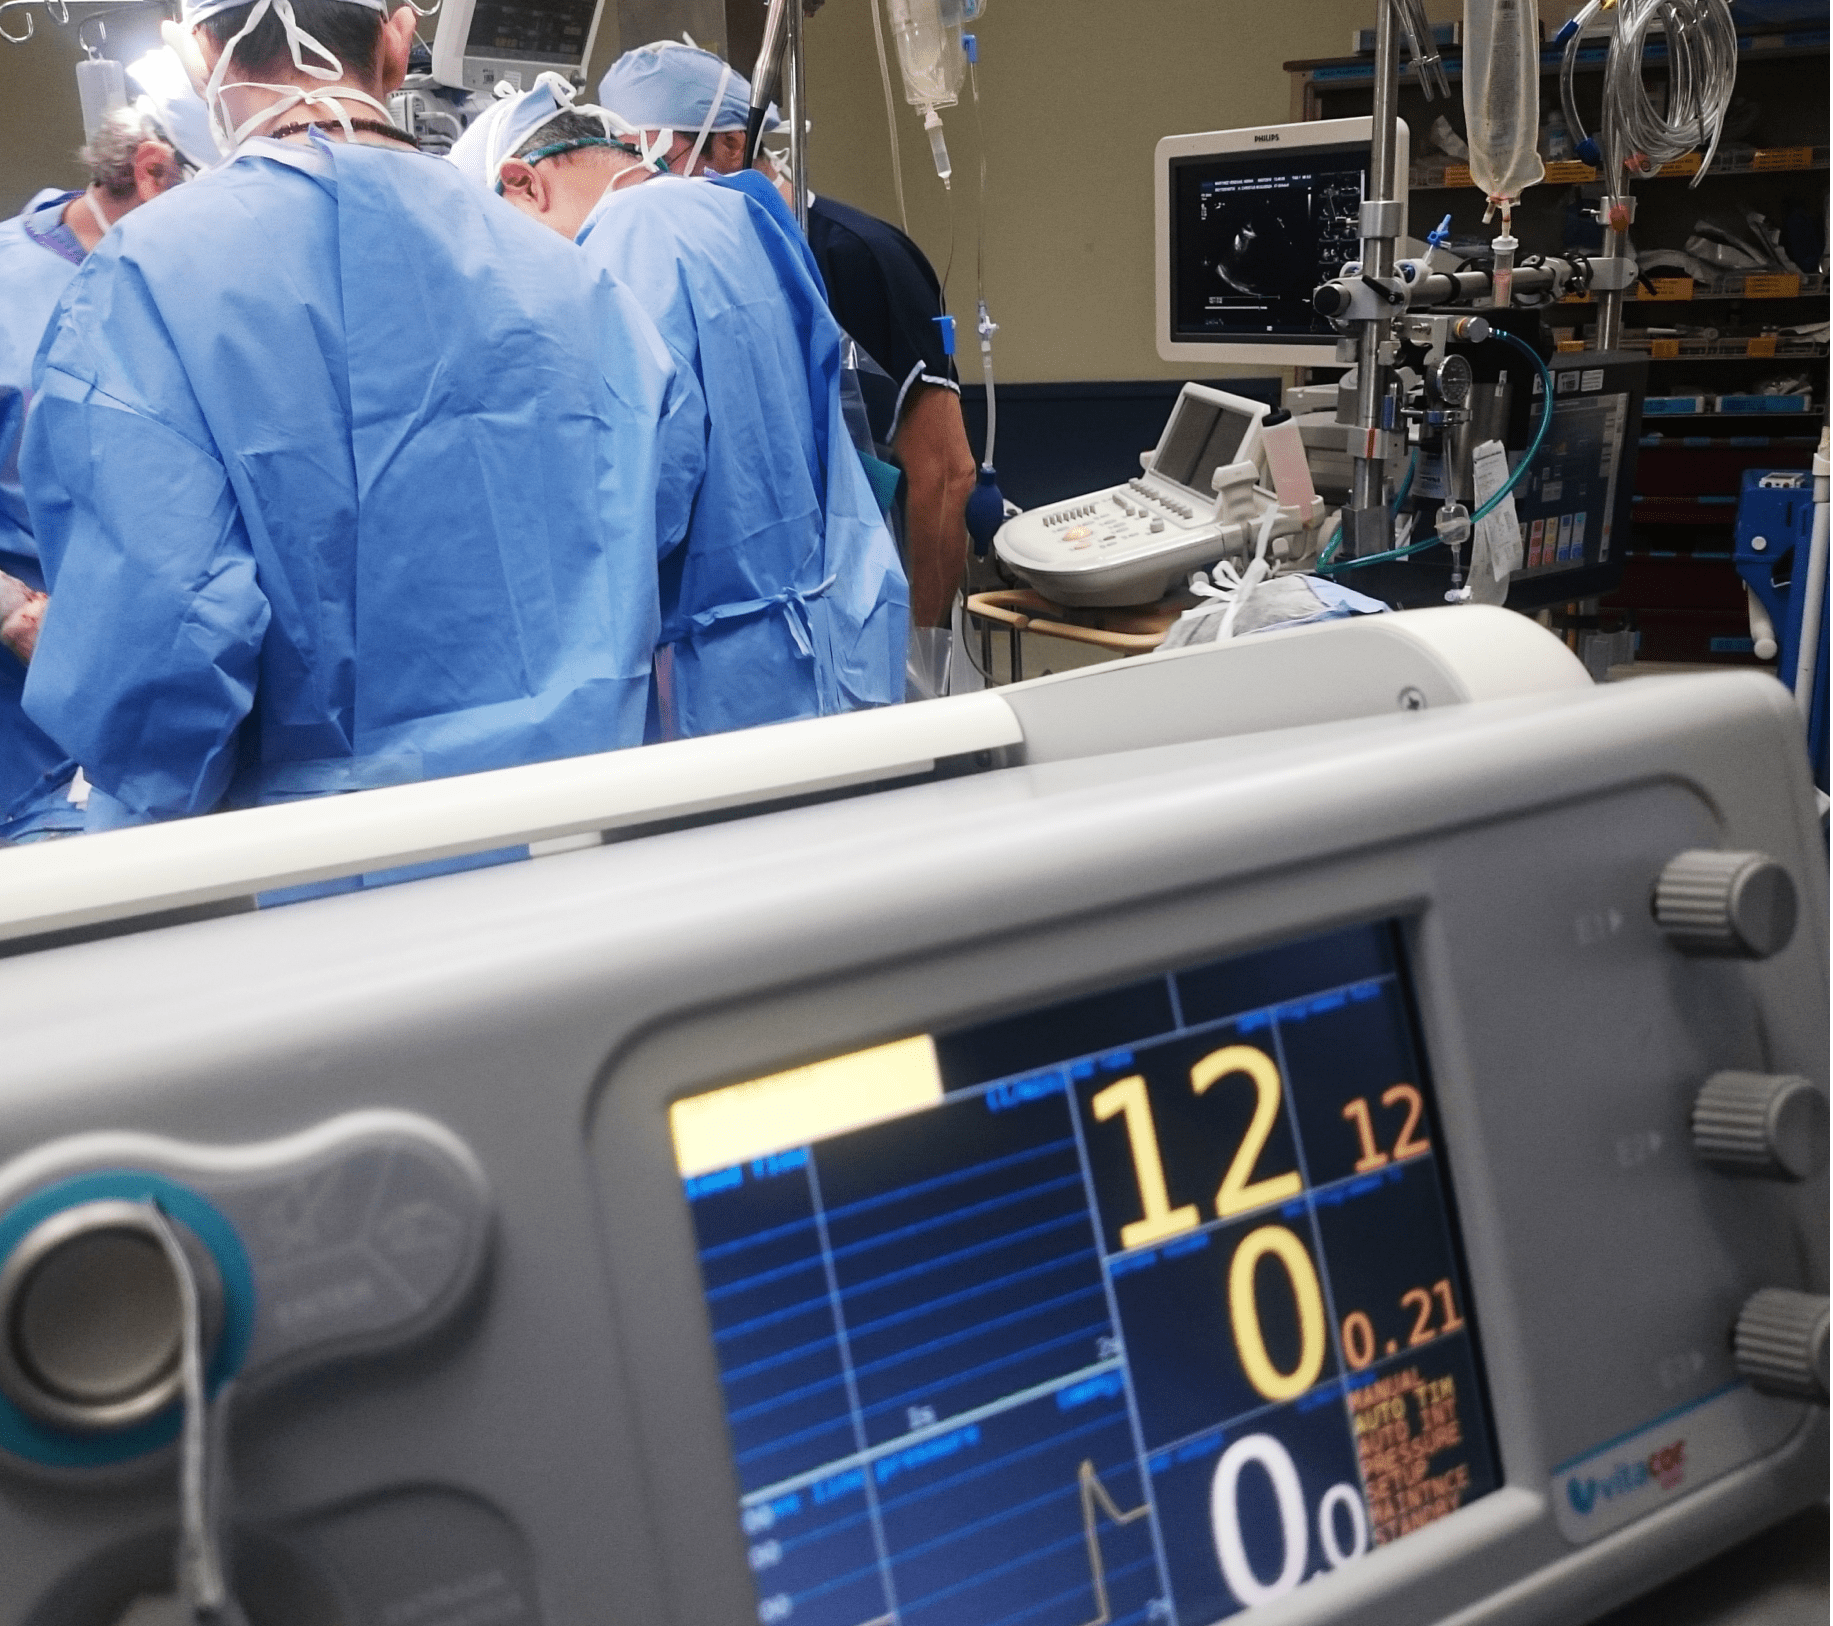 Close up view of a medical vital signs monitor in the foreground with a medical team working on a patient in a hospital theatre behind, their backs turned to the camera